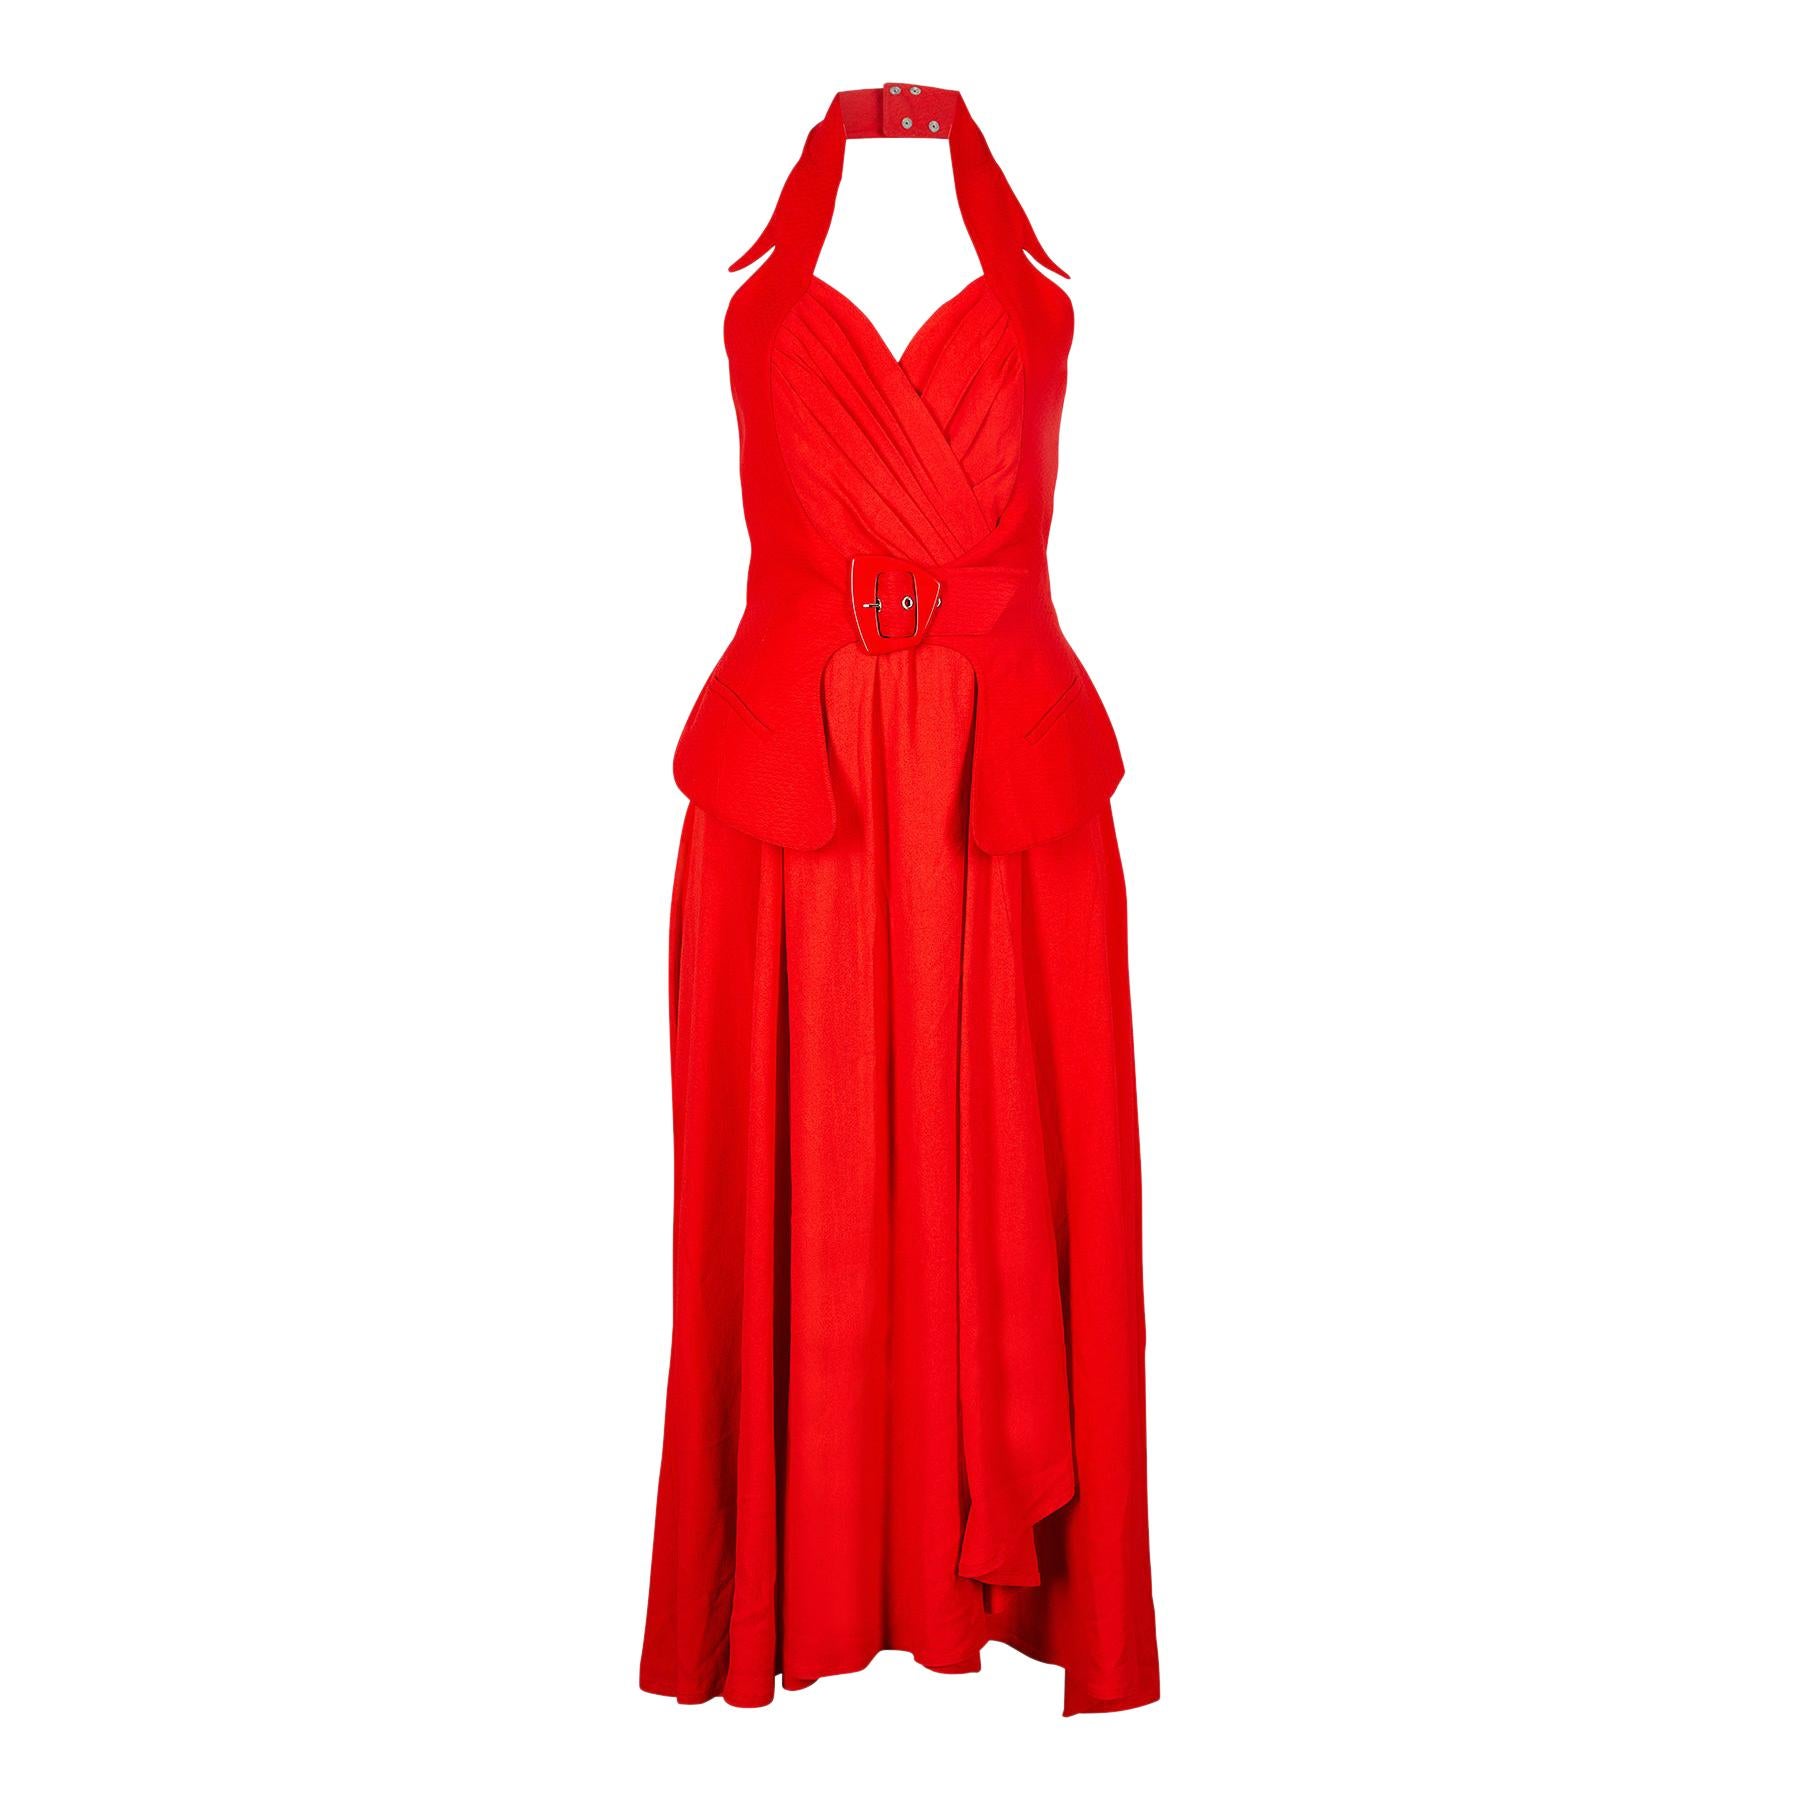 1992 Thierry Mugler Couture Halter Neck Red Dress For Sale